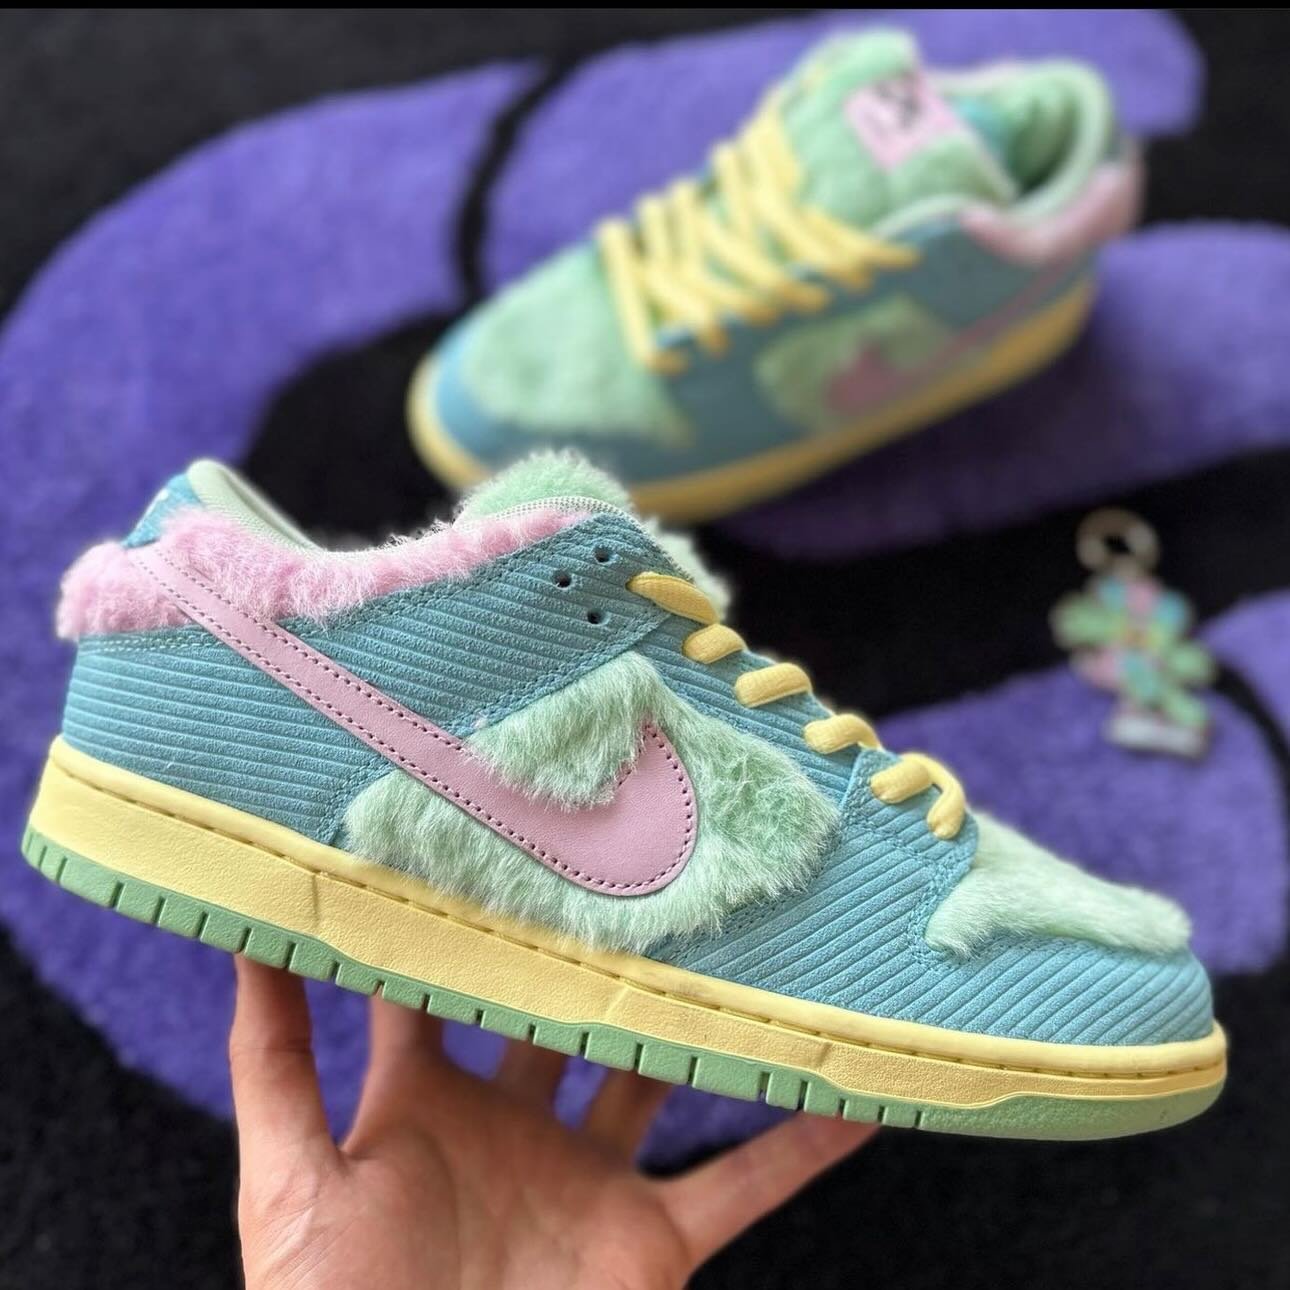 BEST LOOK YET 👀 An upcoming @verdy x Nike SB Dunk Low &lsquo;Visty&rsquo; 🤩

Mixed opinions on this pair.. Do you dig these or will they be an easy pass? 🤔 

Read all the details via link in bio! 

#SneakerSpott #NikeSBDunk #Verdy